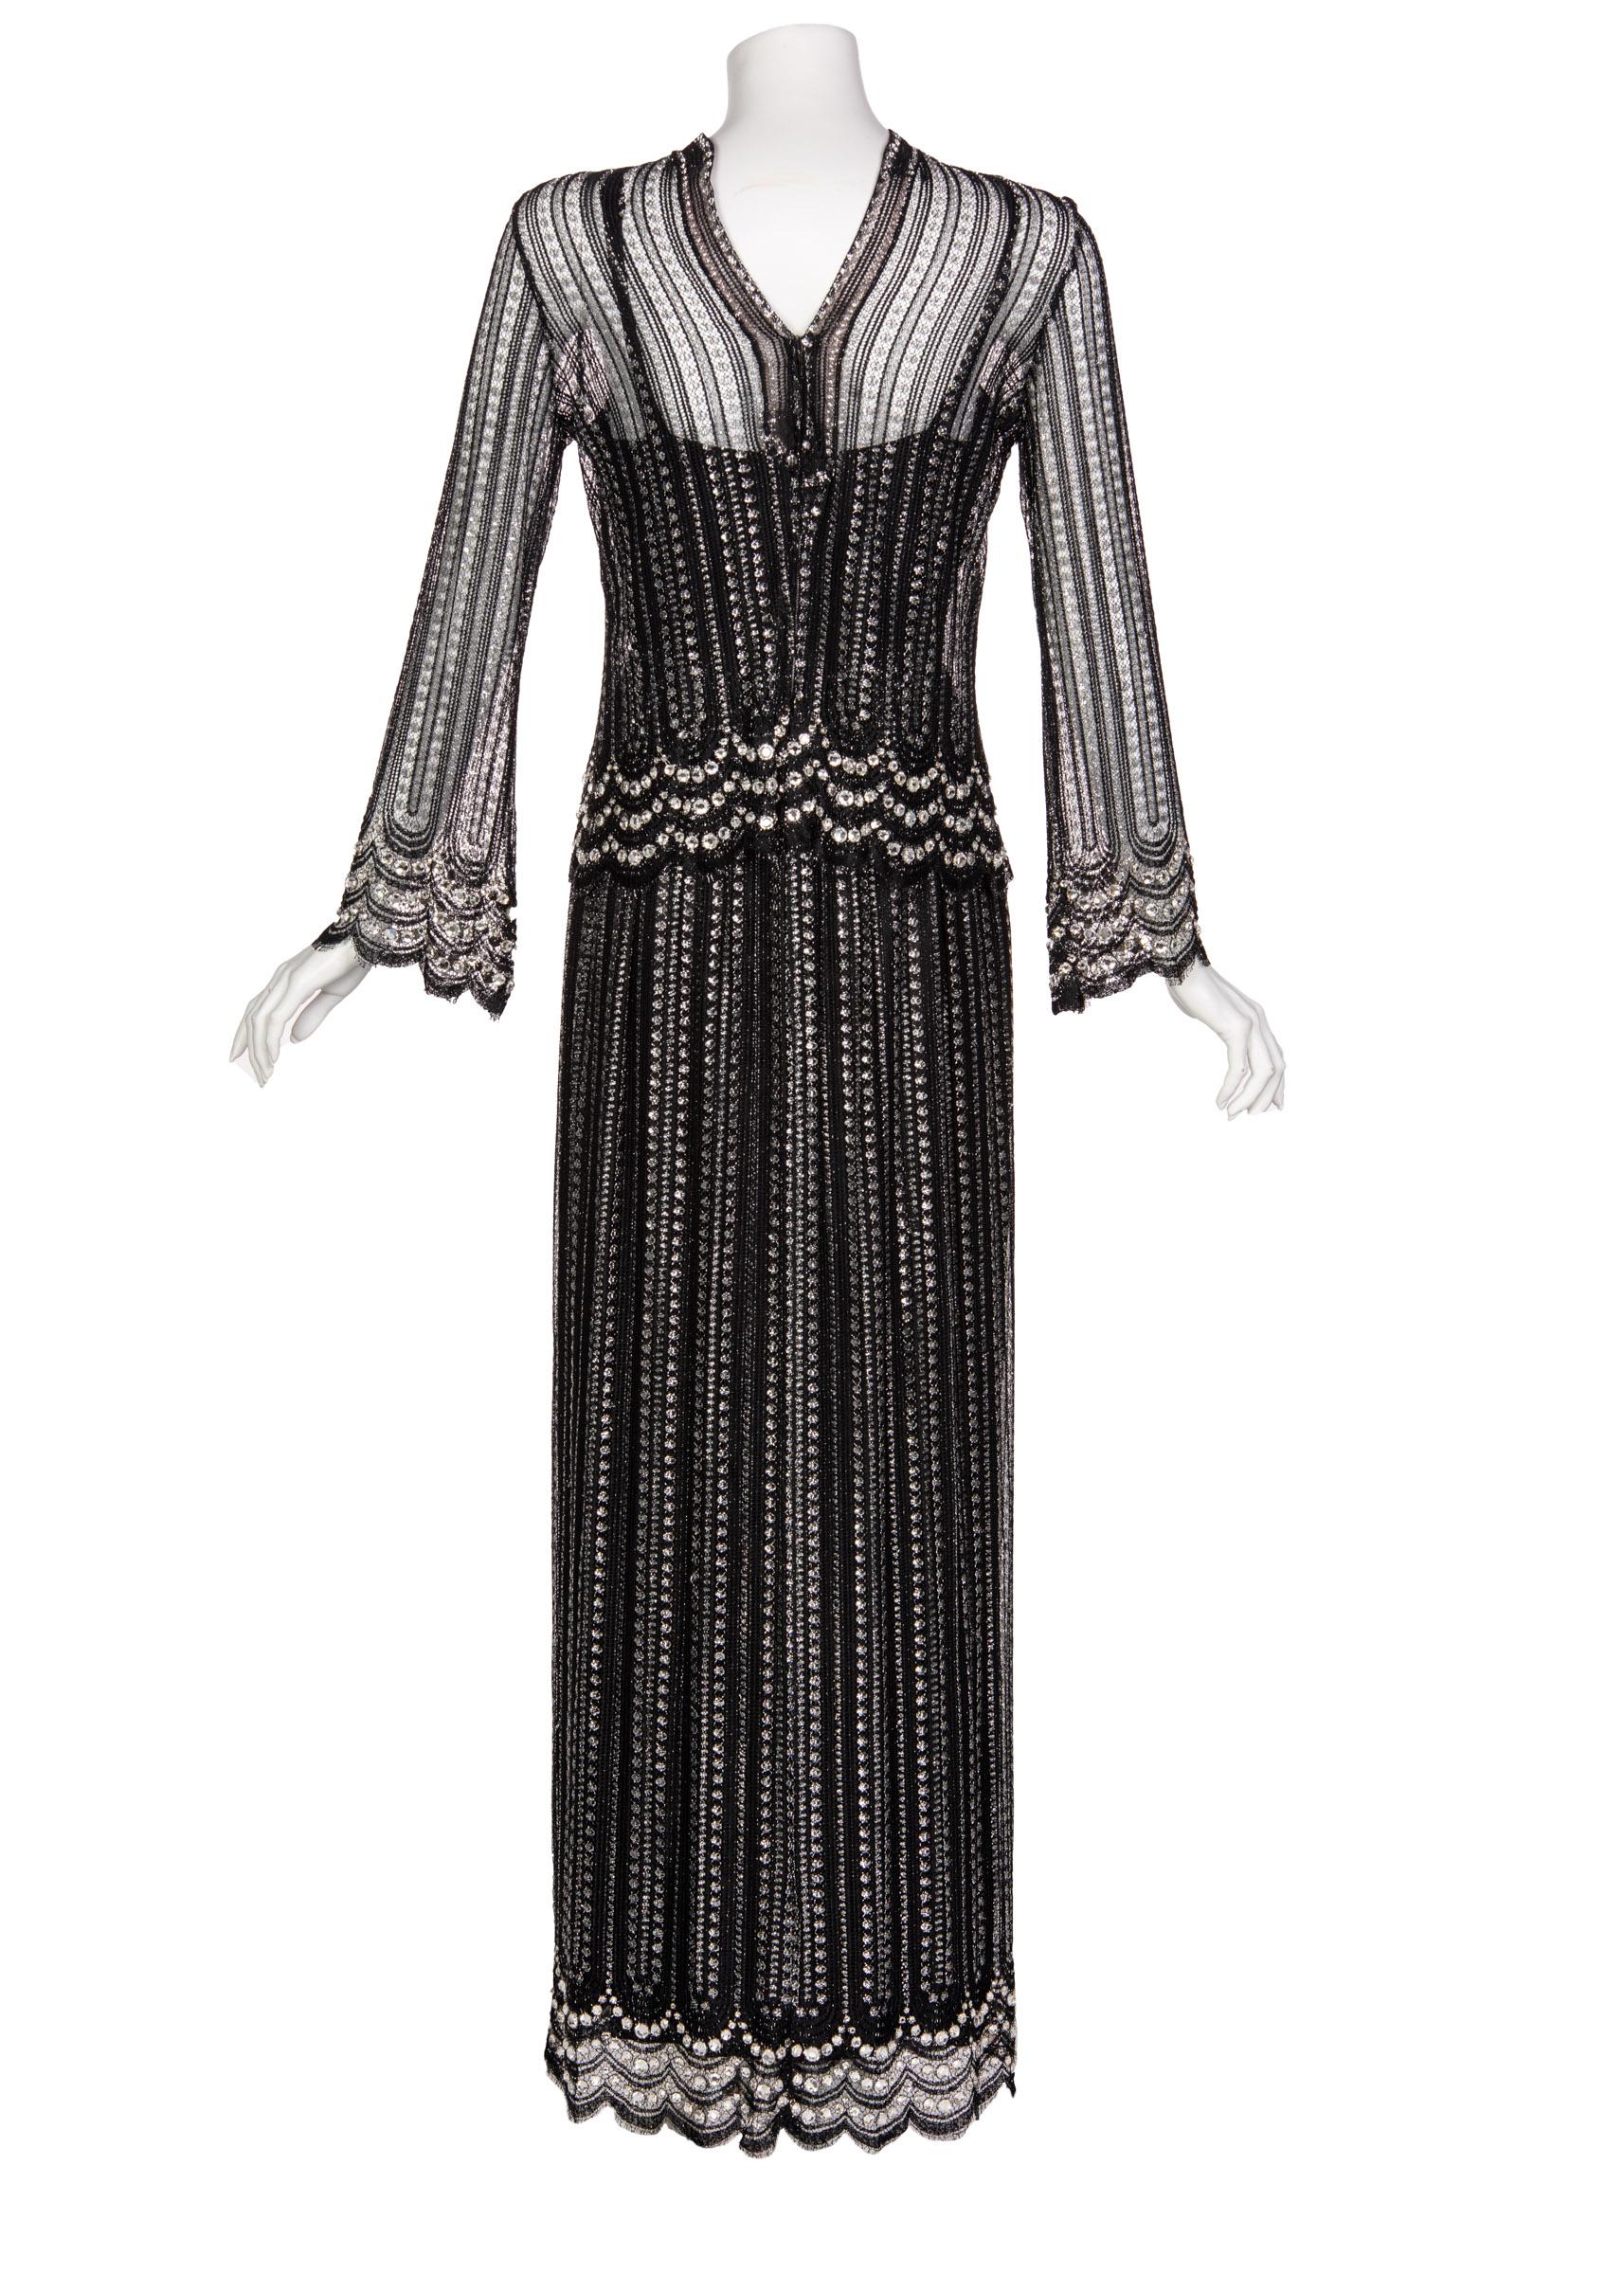 Women's Christian Dior Attributed  Black and Silver Lace Crystals Maxi Dress, 1970s